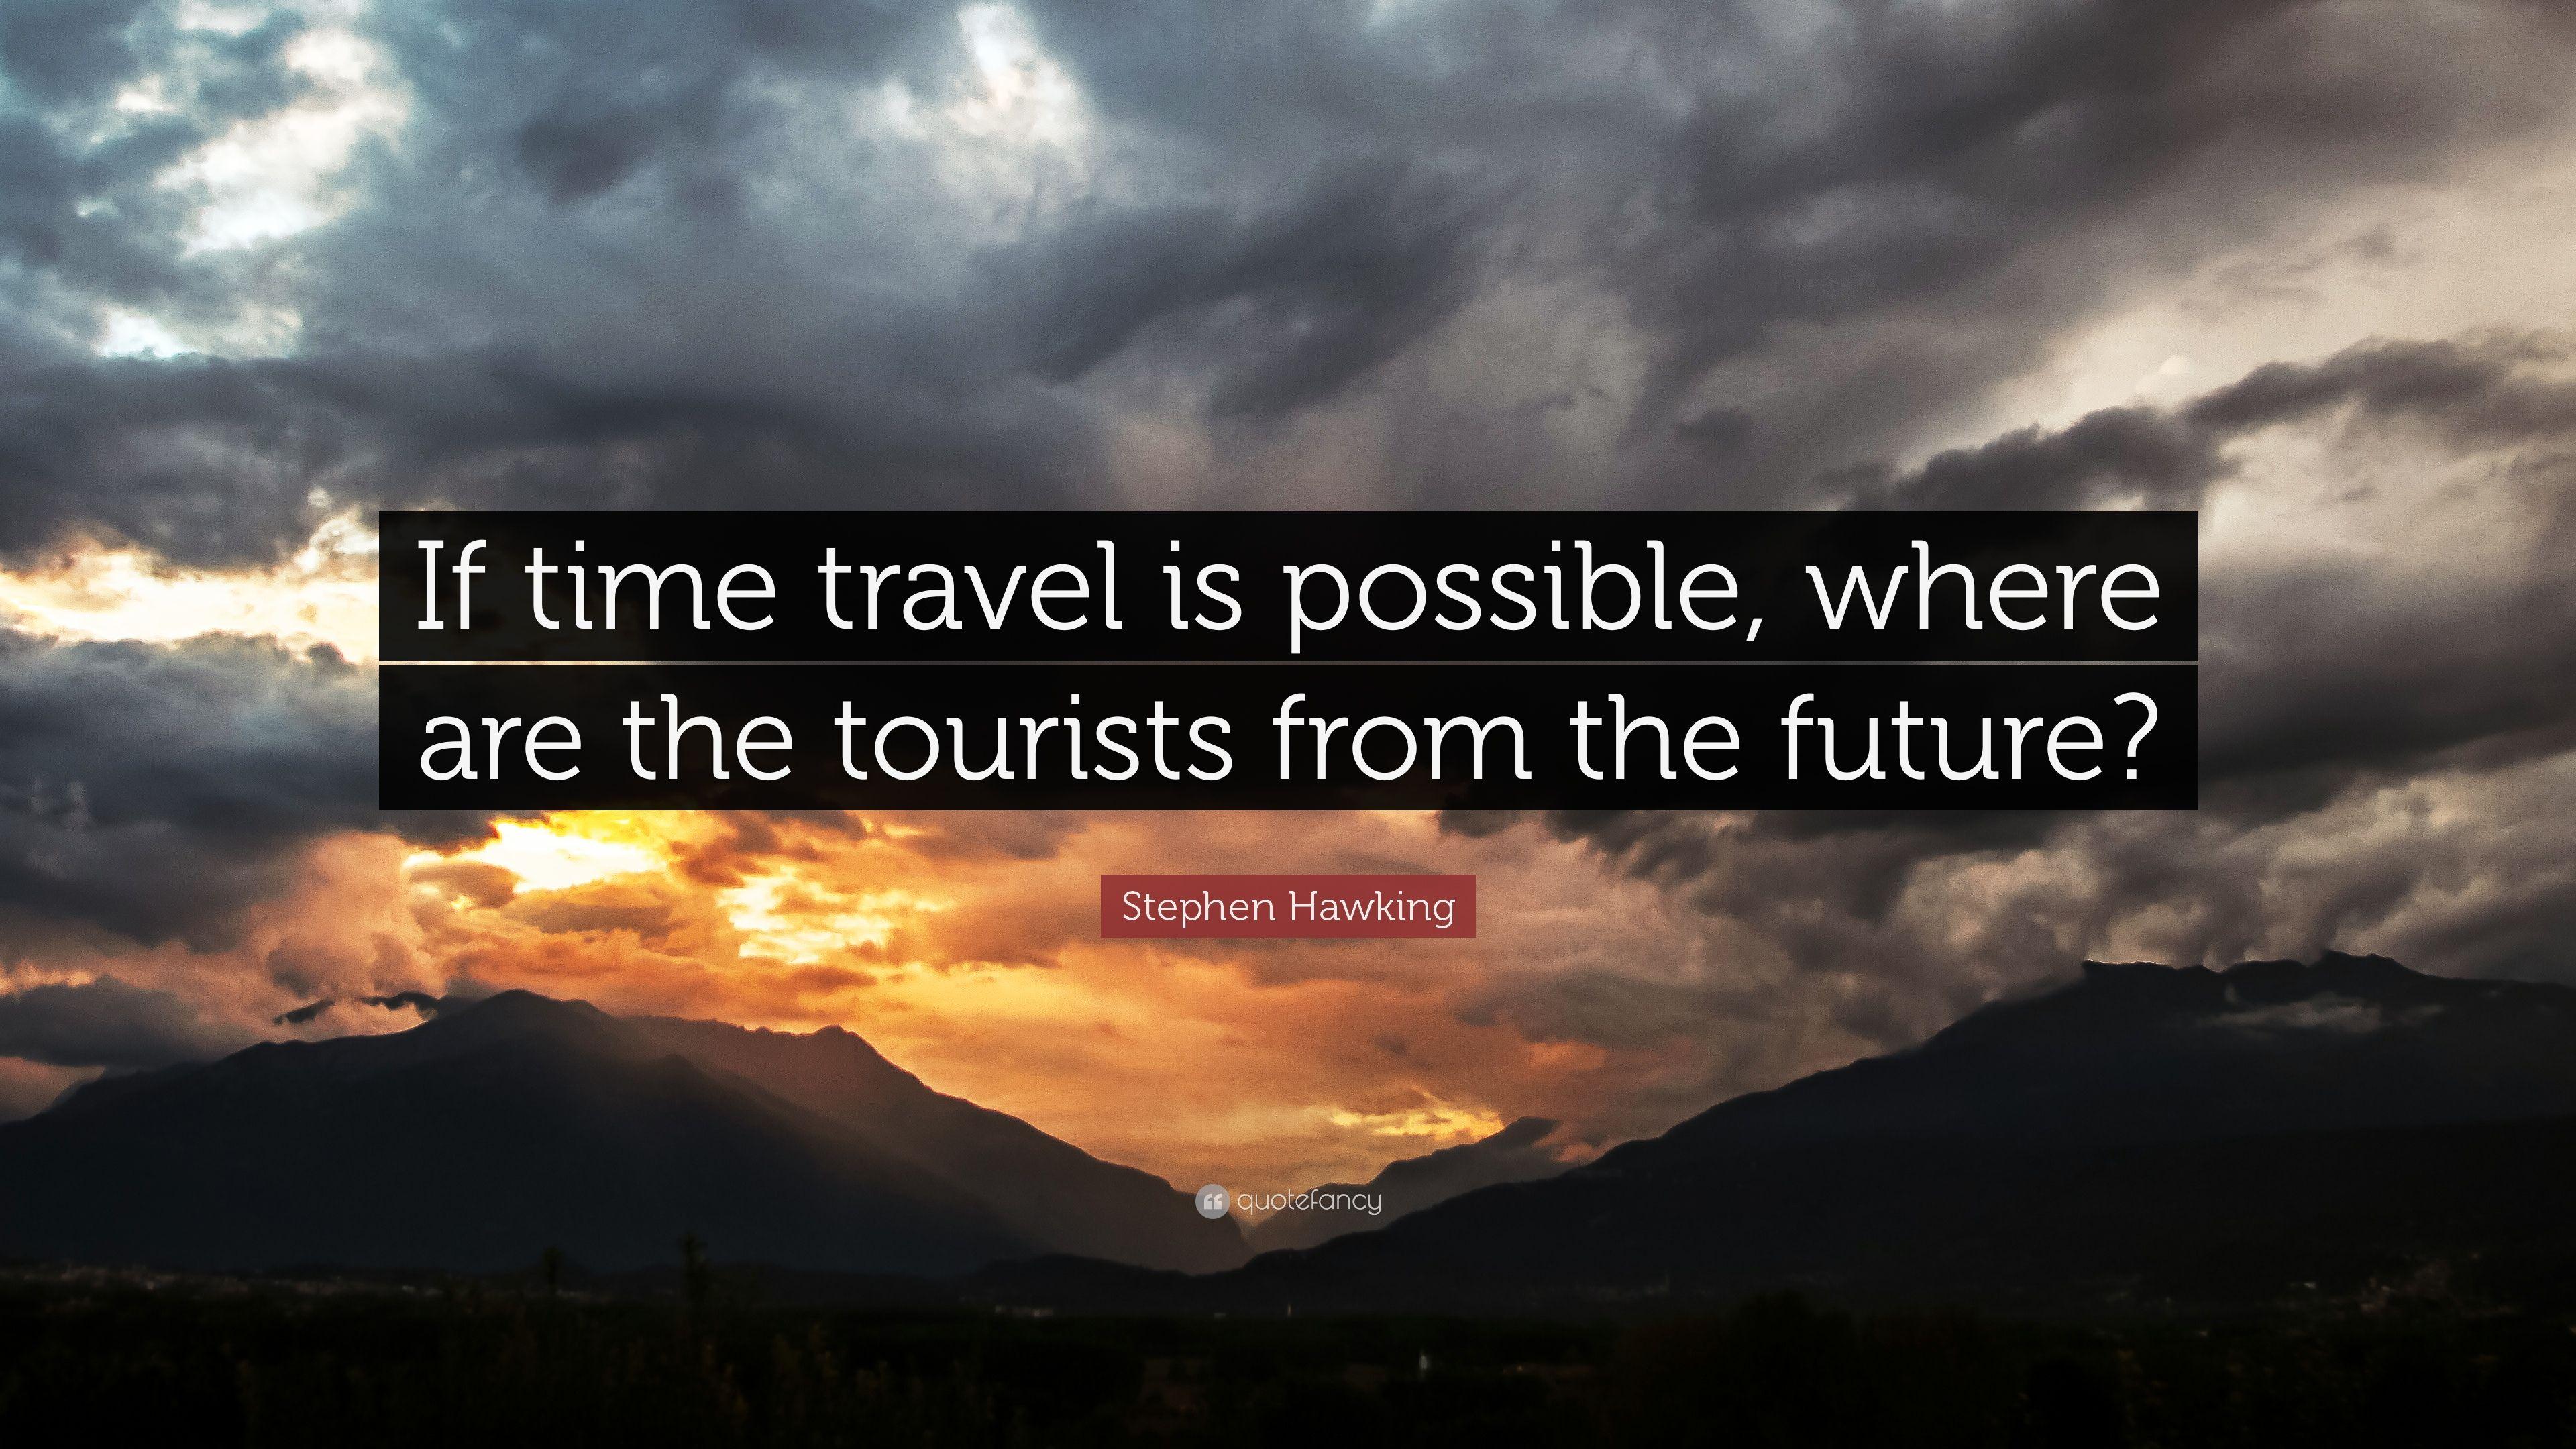 Stephen Hawking Quote: “If time travel is possible, where are